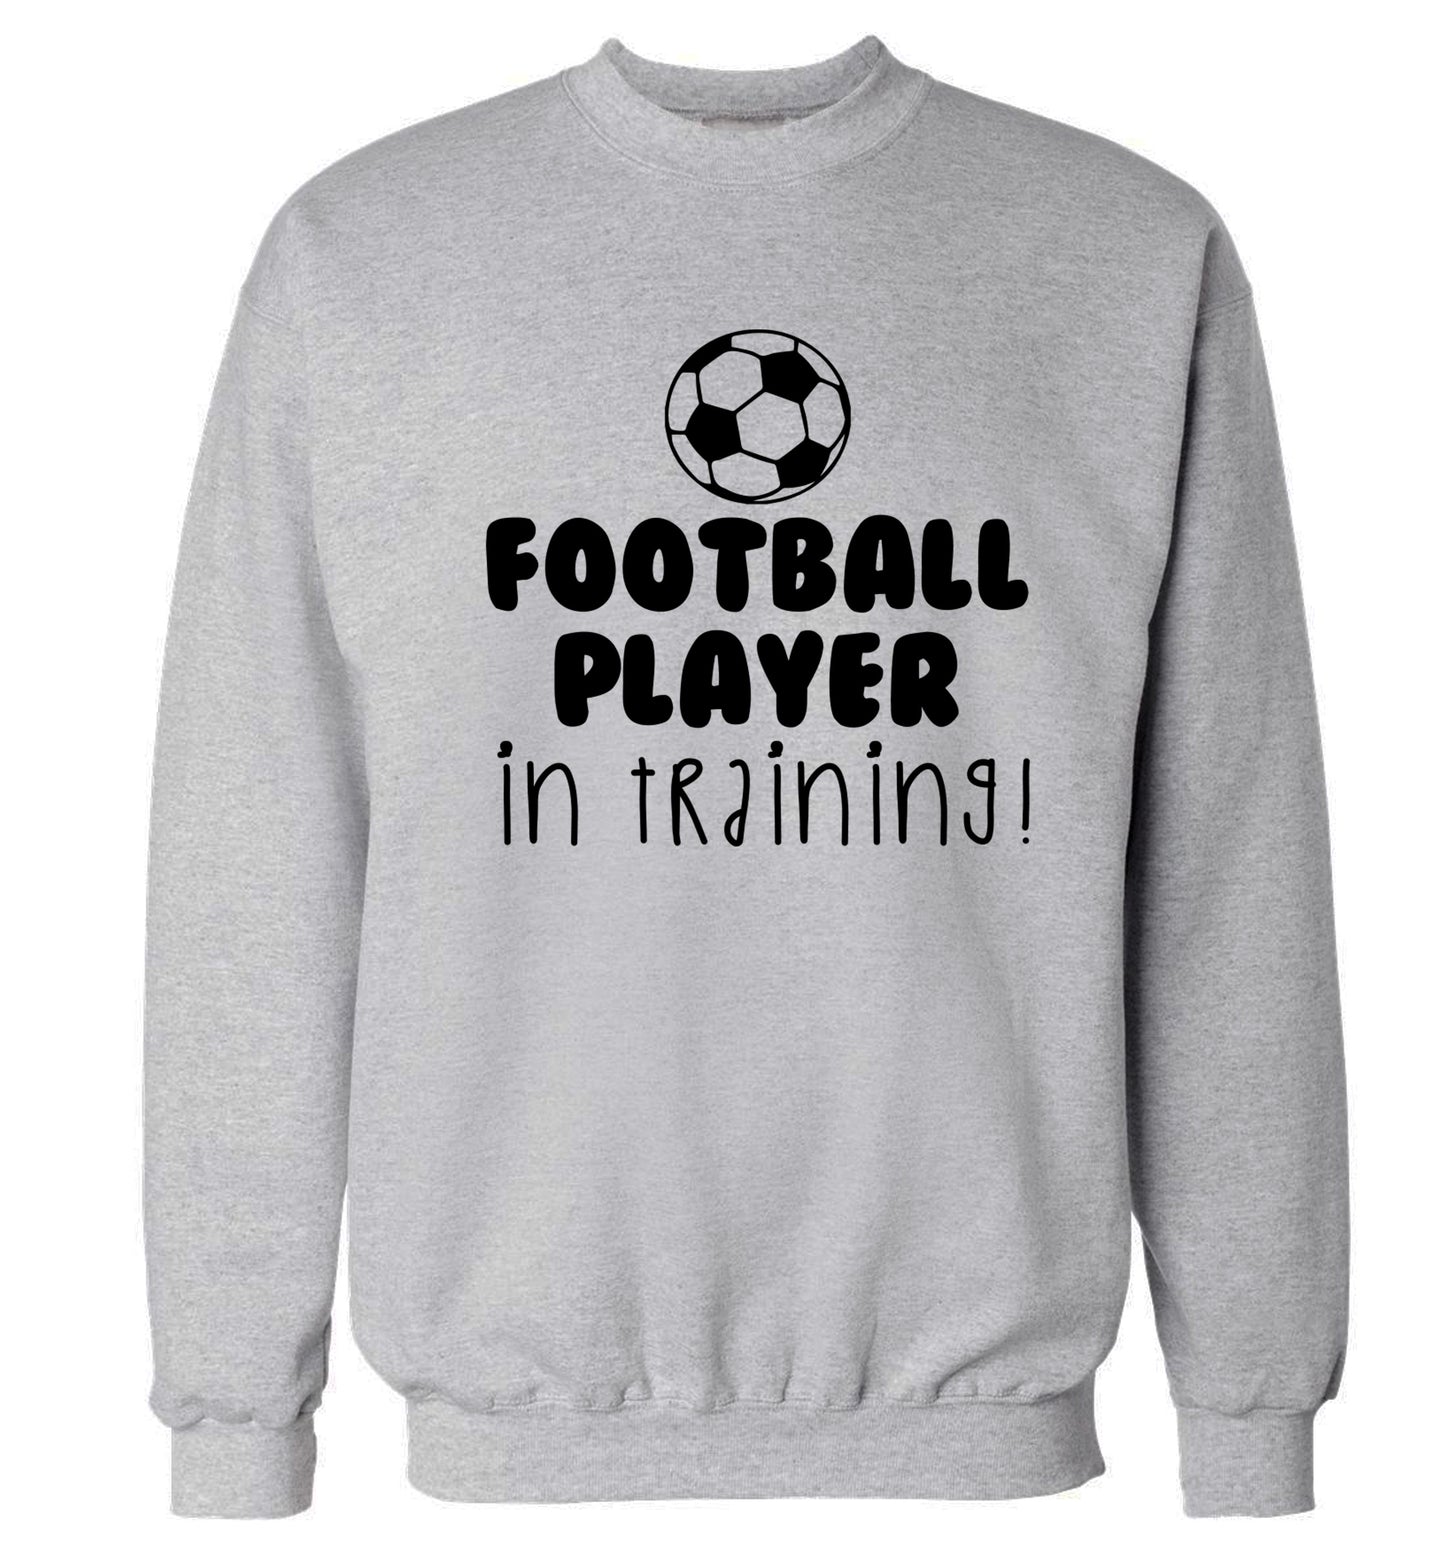 Football player in training Adult's unisex grey Sweater 2XL